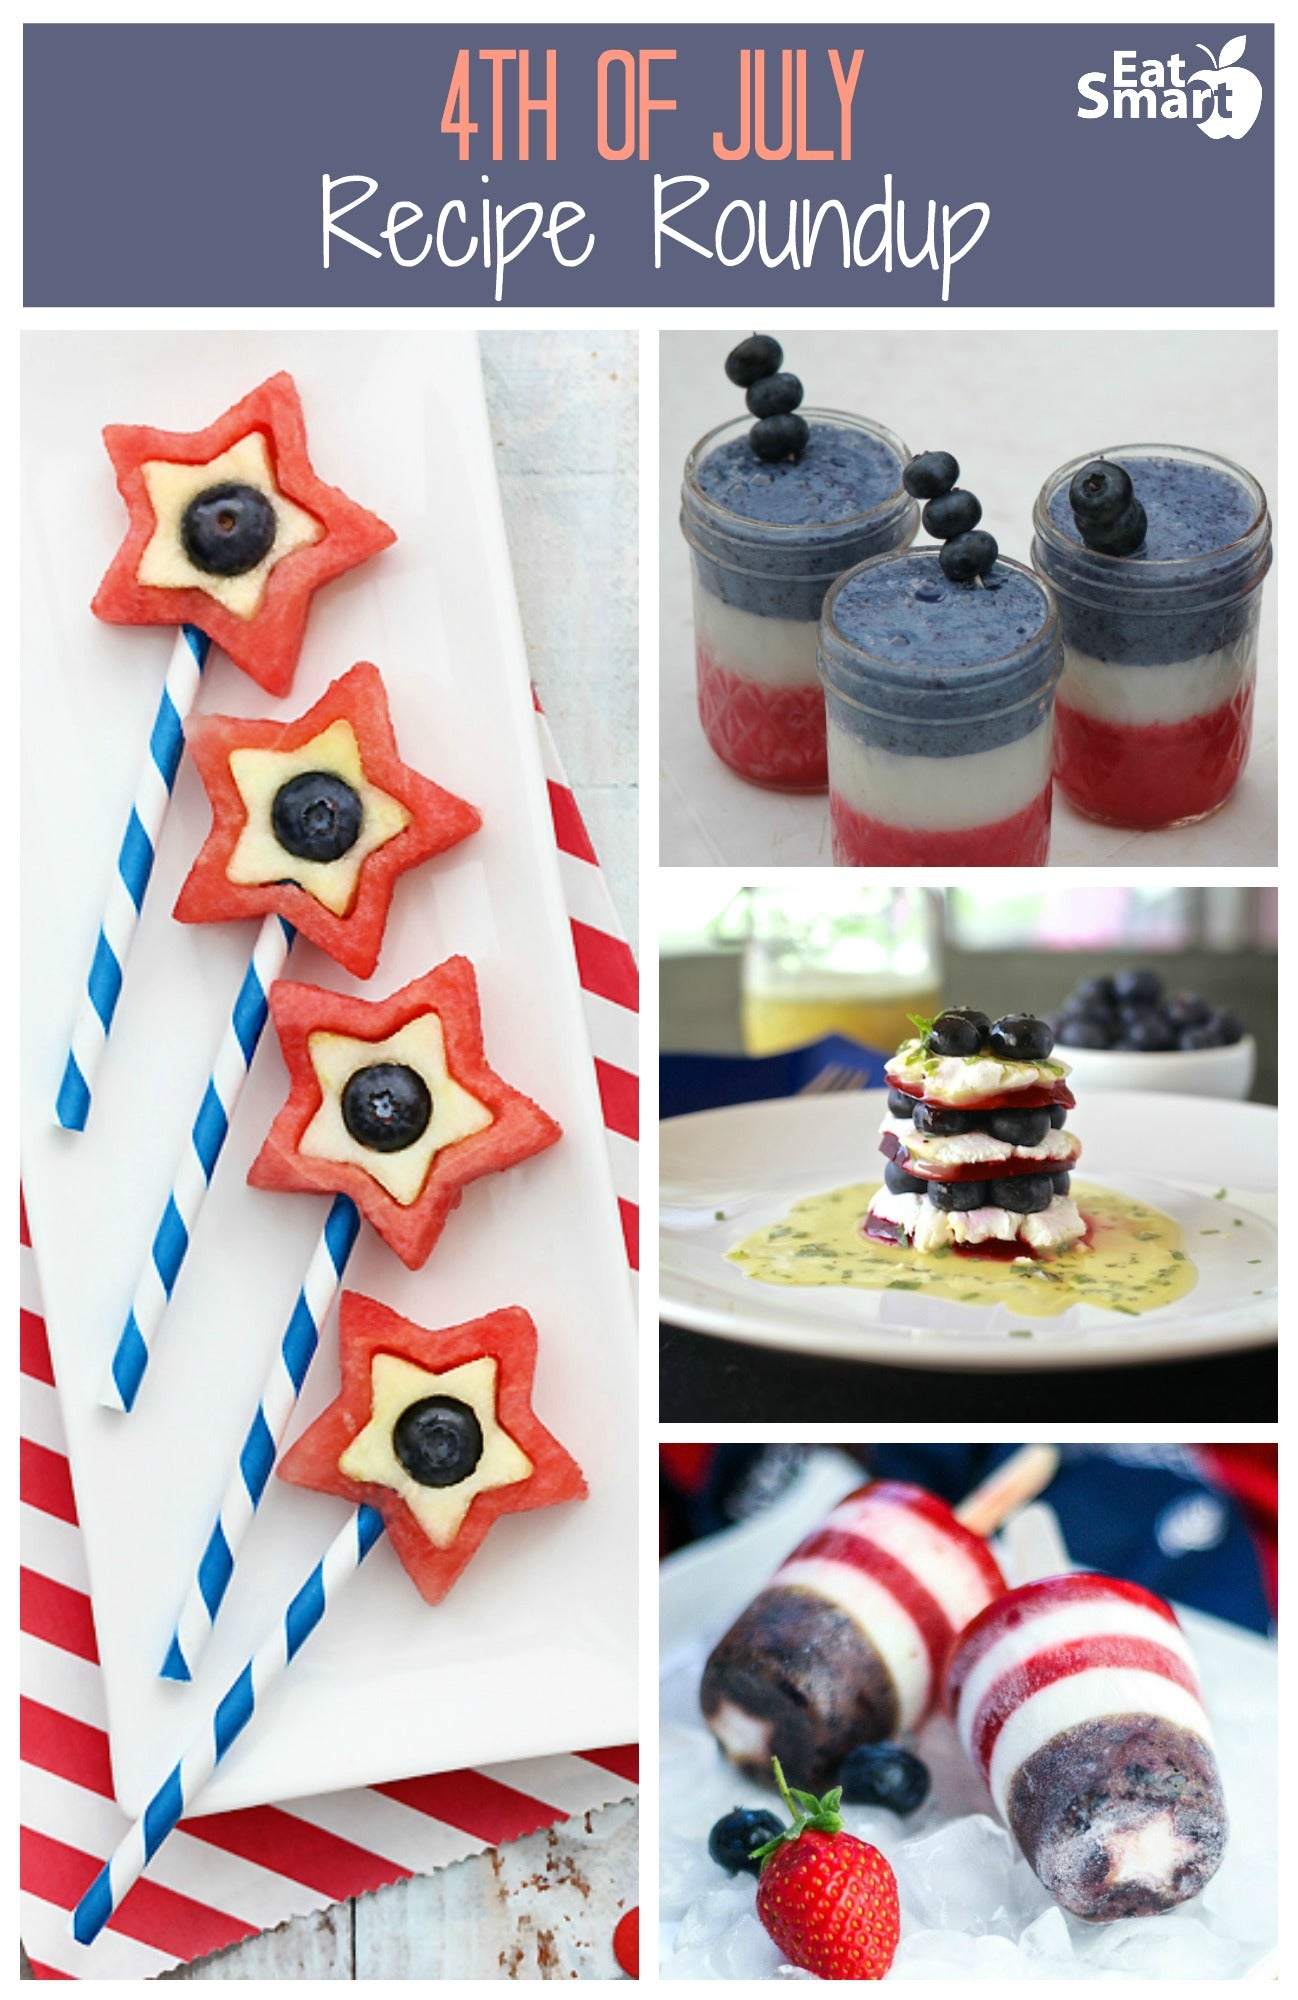 diy-red-white-blue-recipes-for-july-4th-vertical-2